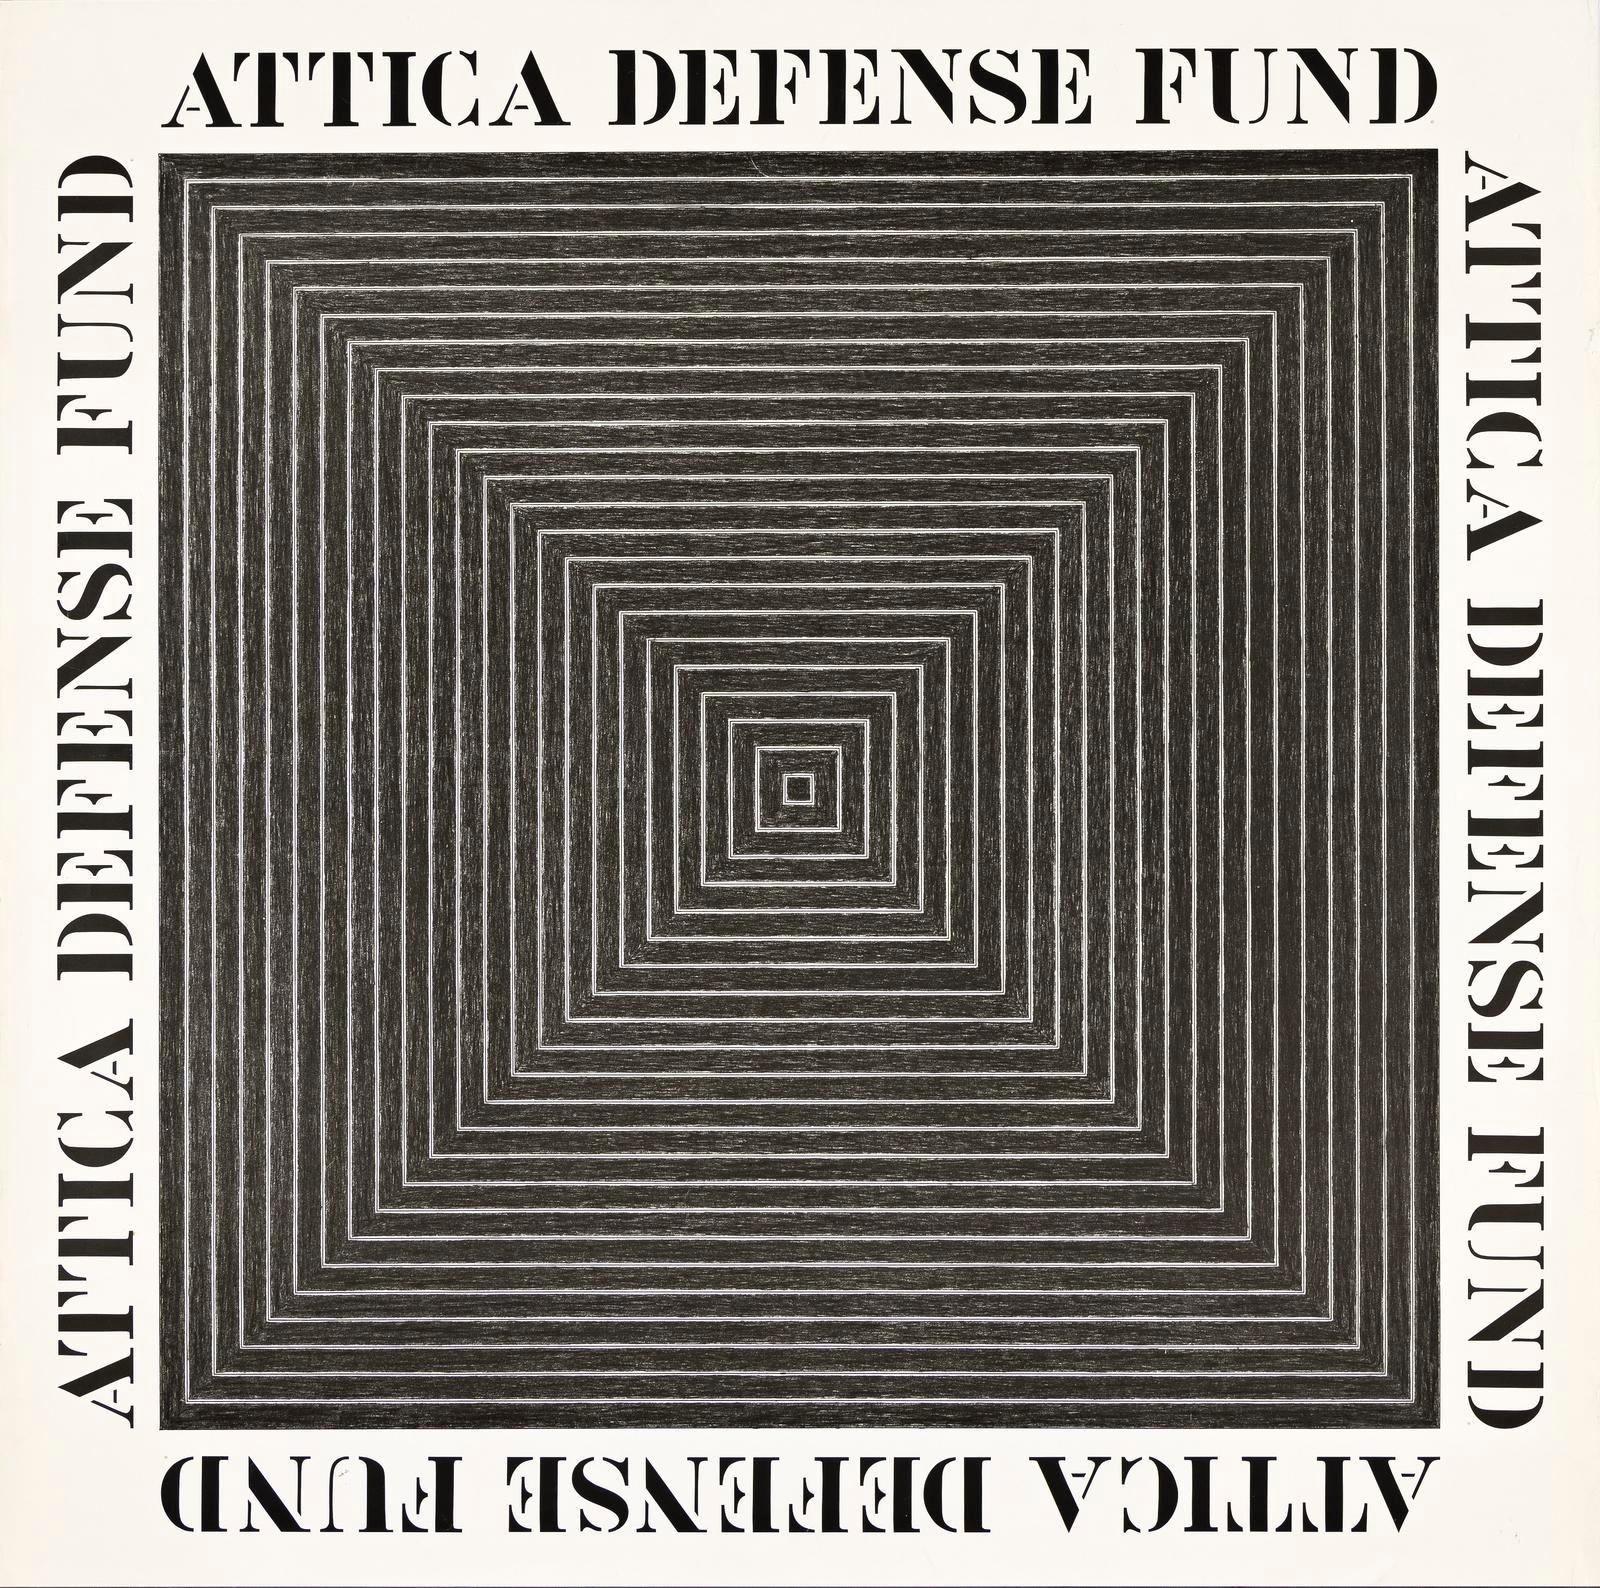 Frank Stella Abstract Print - Attica Defense Fund, historic Limited edition 1970s poster on lithographic paper